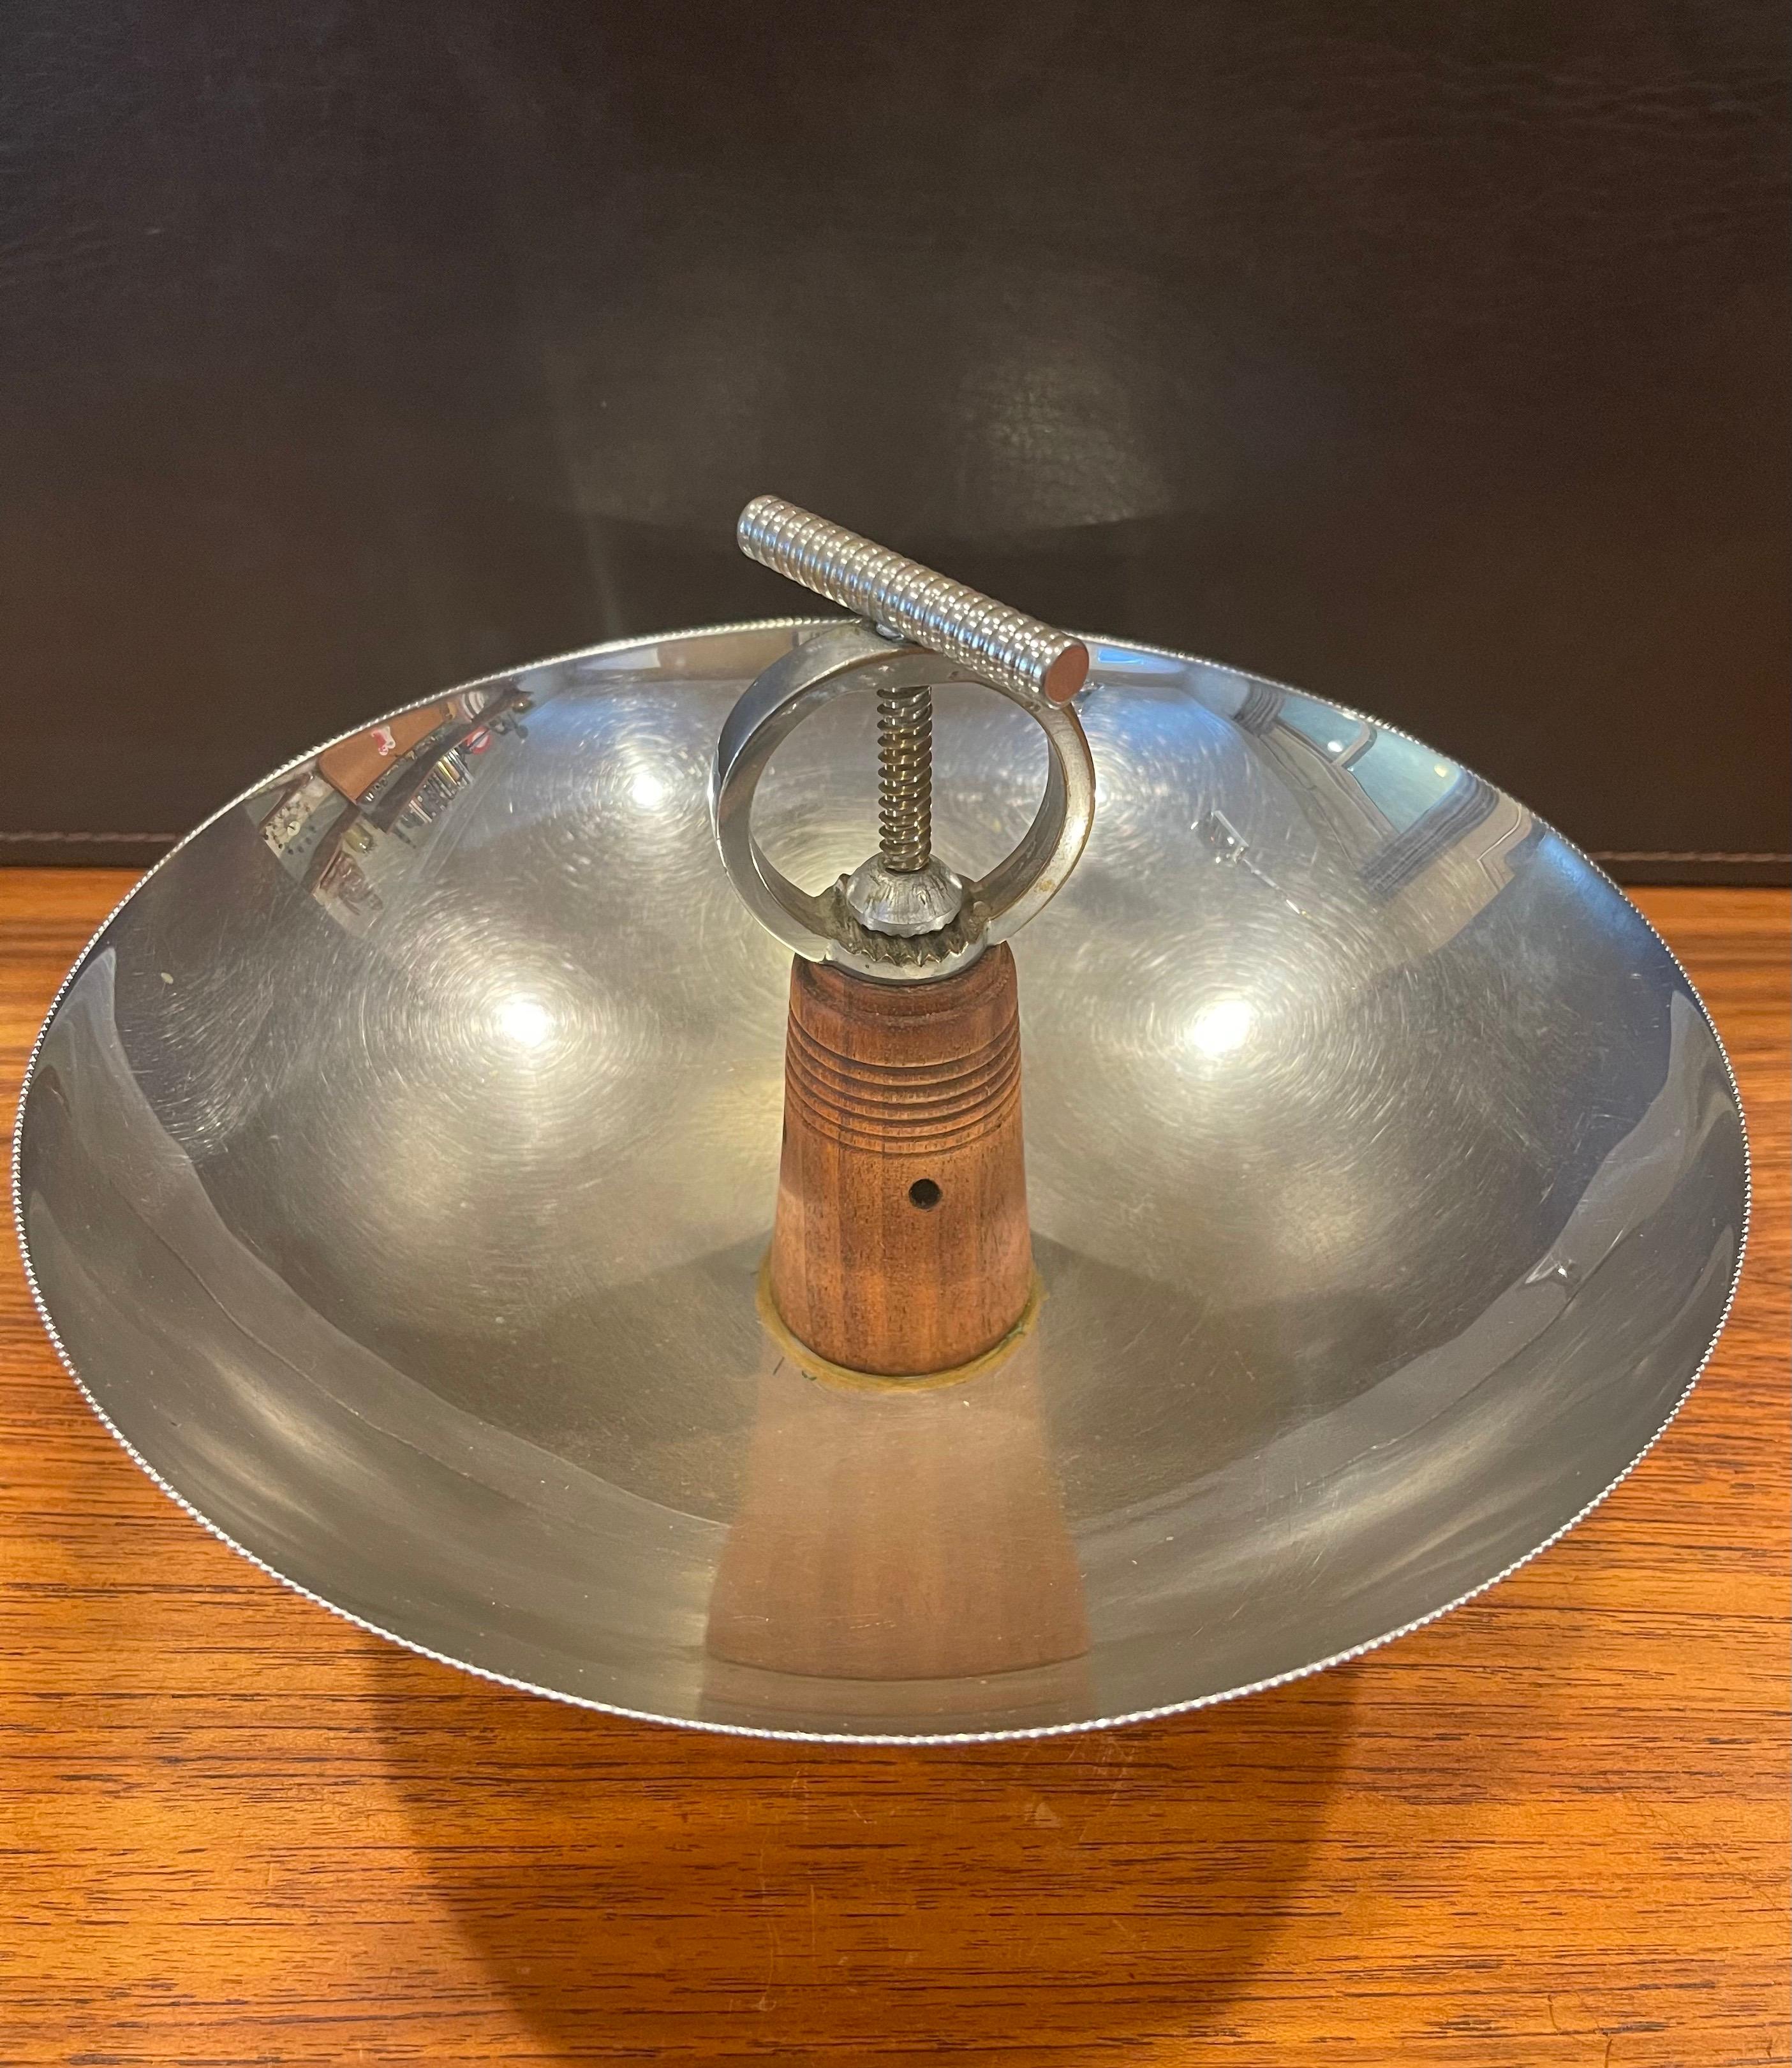 Art Deco Chrome Nut Bowl with Built-in Cracker by Chase Co. For Sale 3